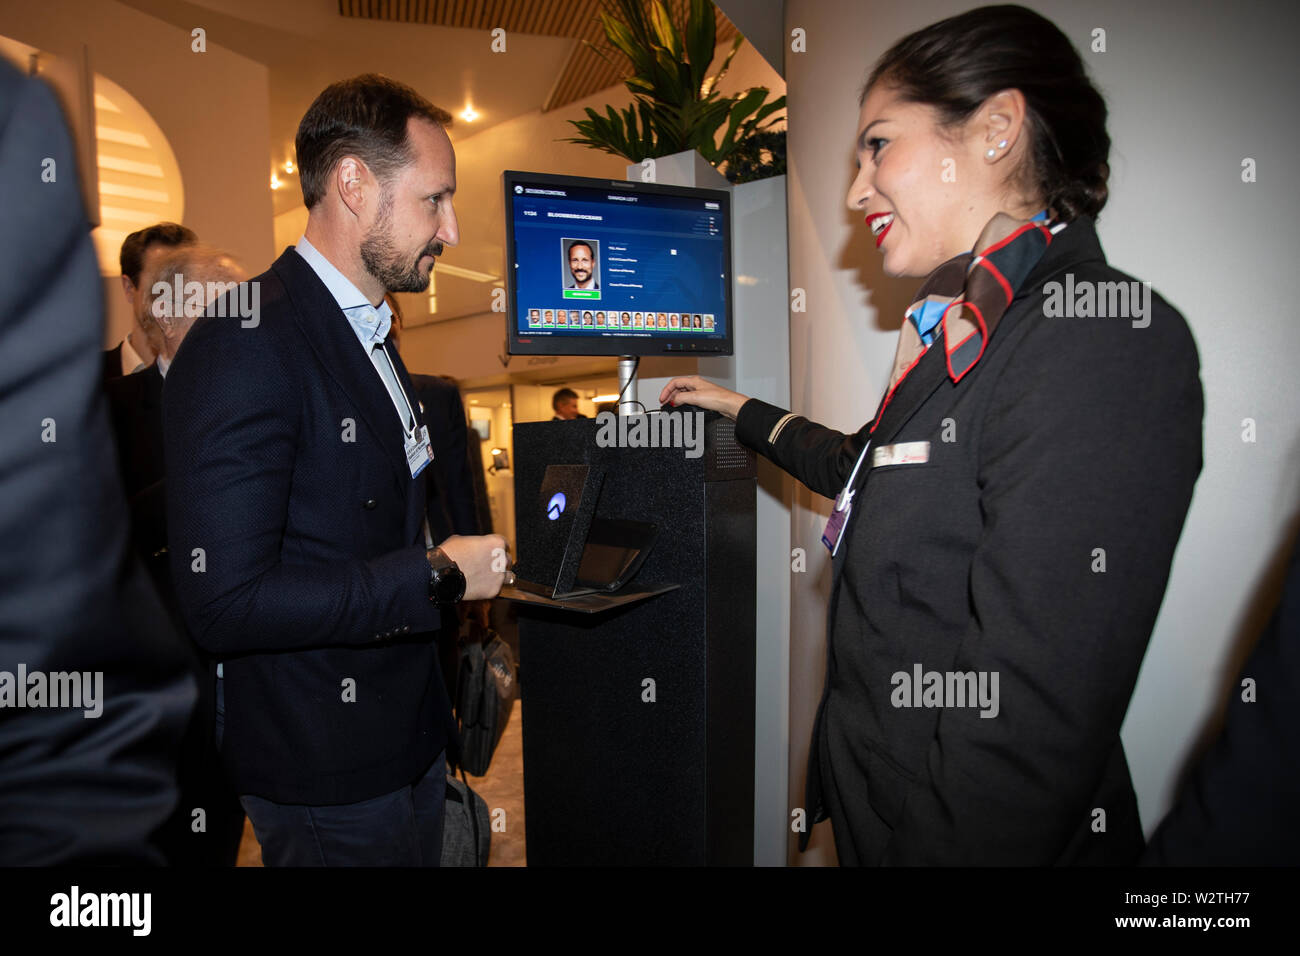 During the World Economic Forum, His Royal Highness Crown Prince Haakon of Norway has his ID card checked before entering a lecture by Nina Jensen and Al Gore on climate and oceans. Stock Photo